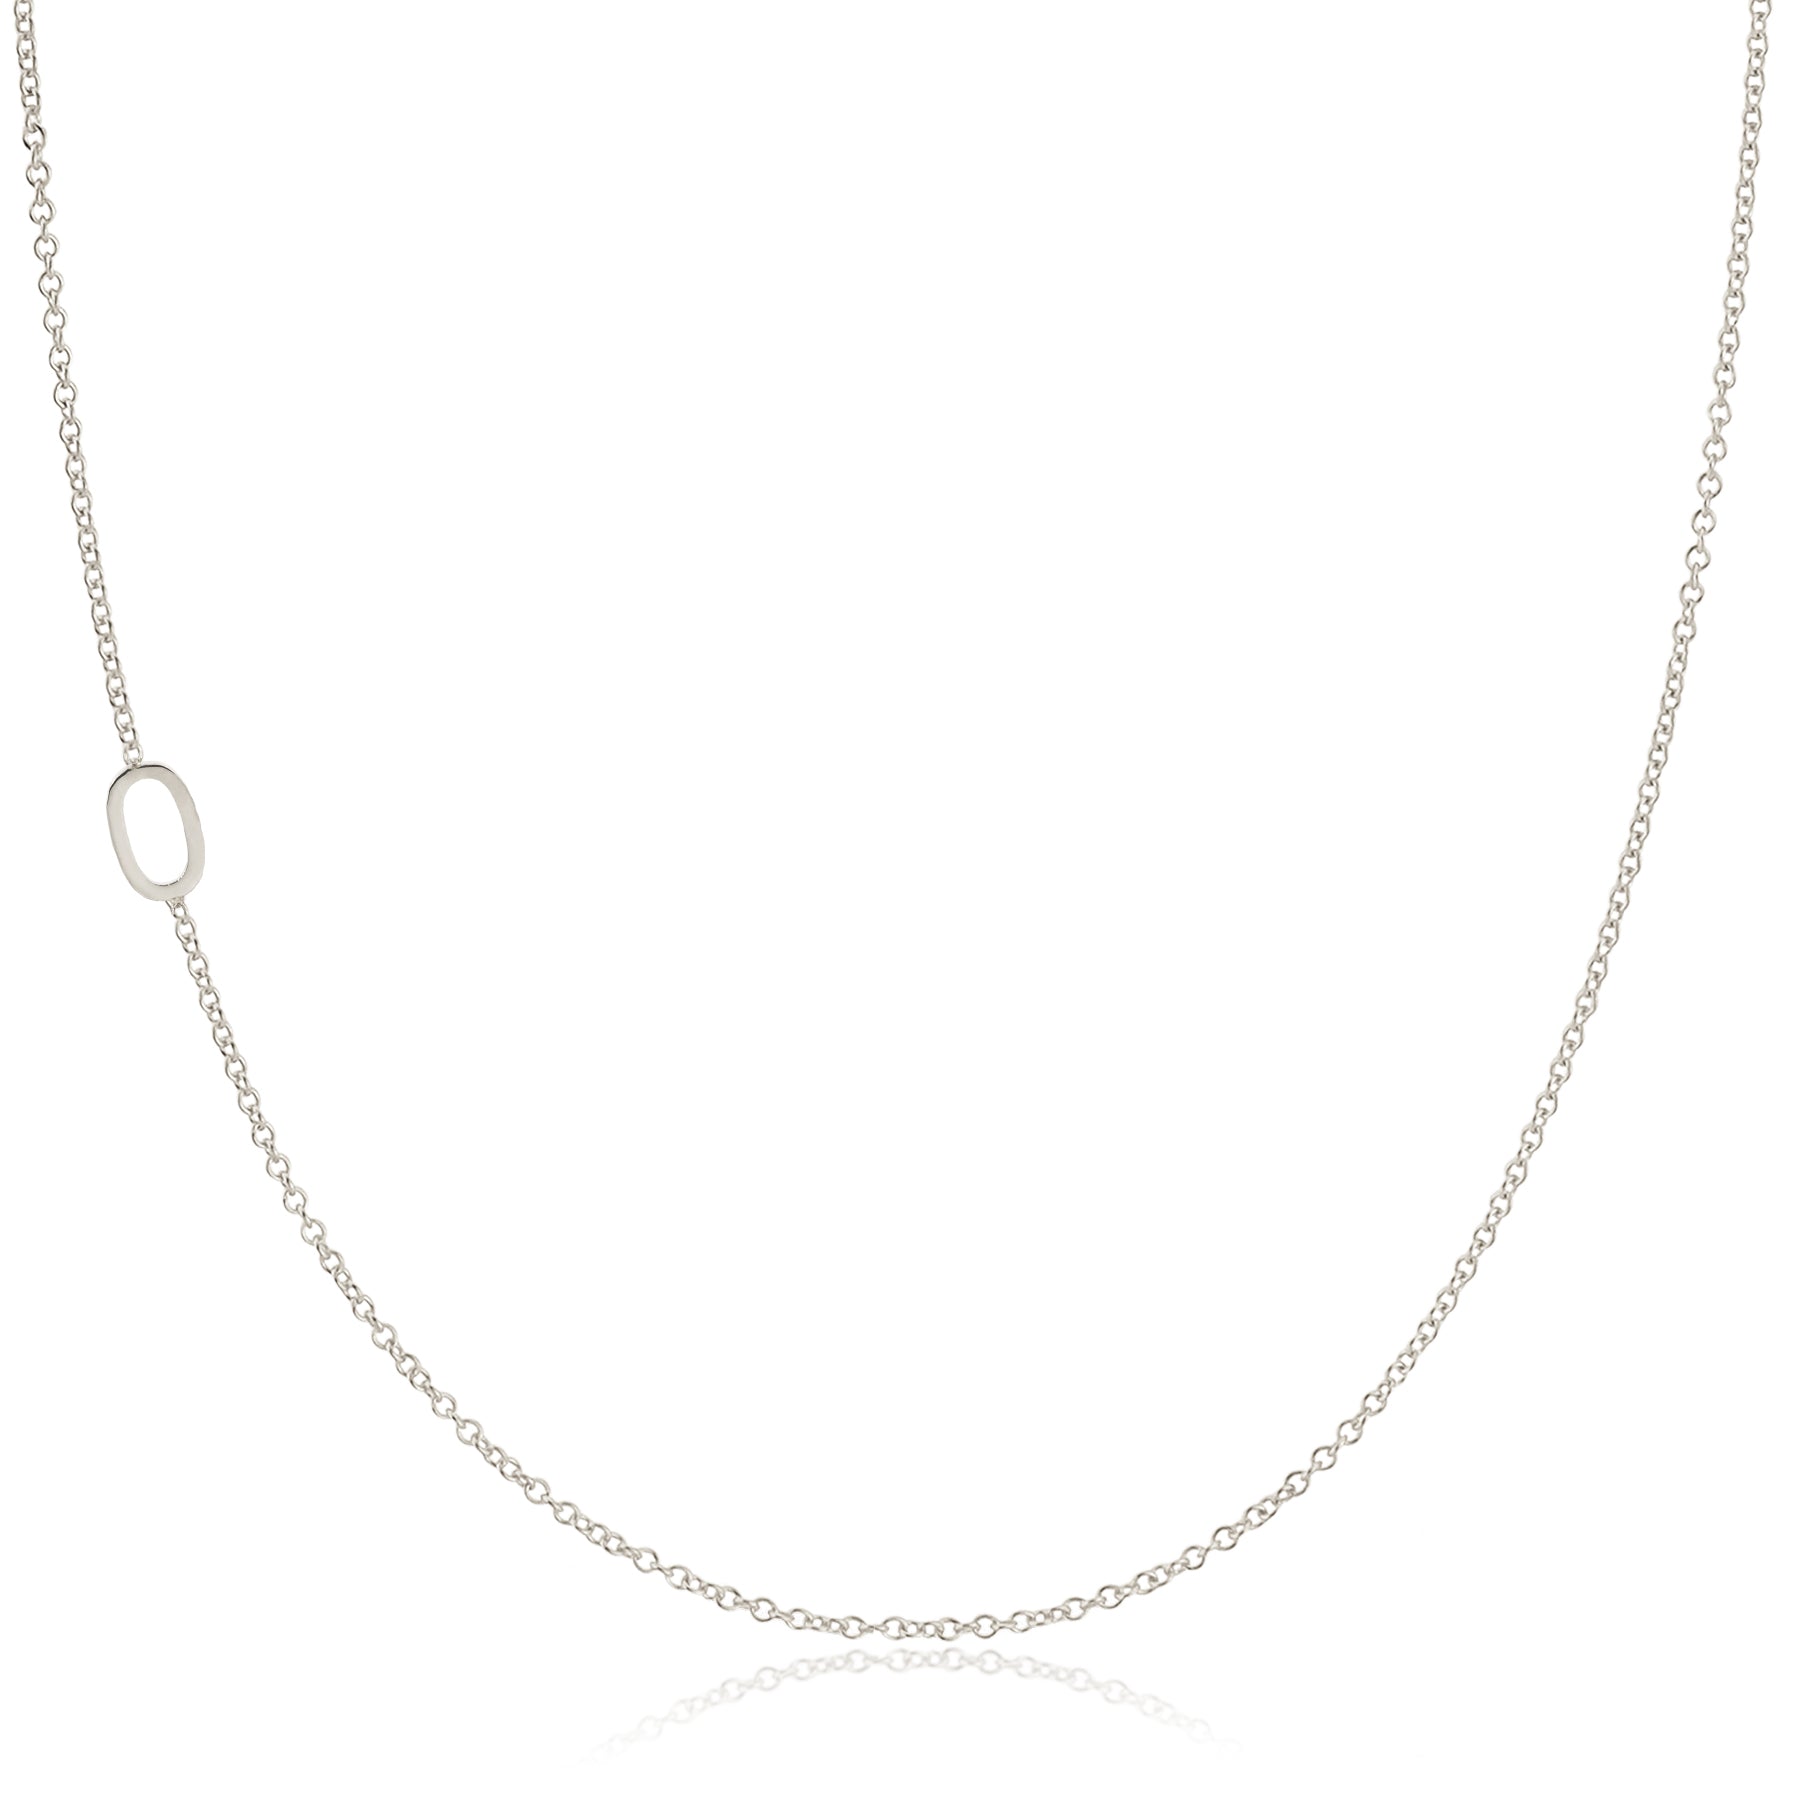 14K GOLD ASYMMETRICAL NUMBER NECKLACE - 0